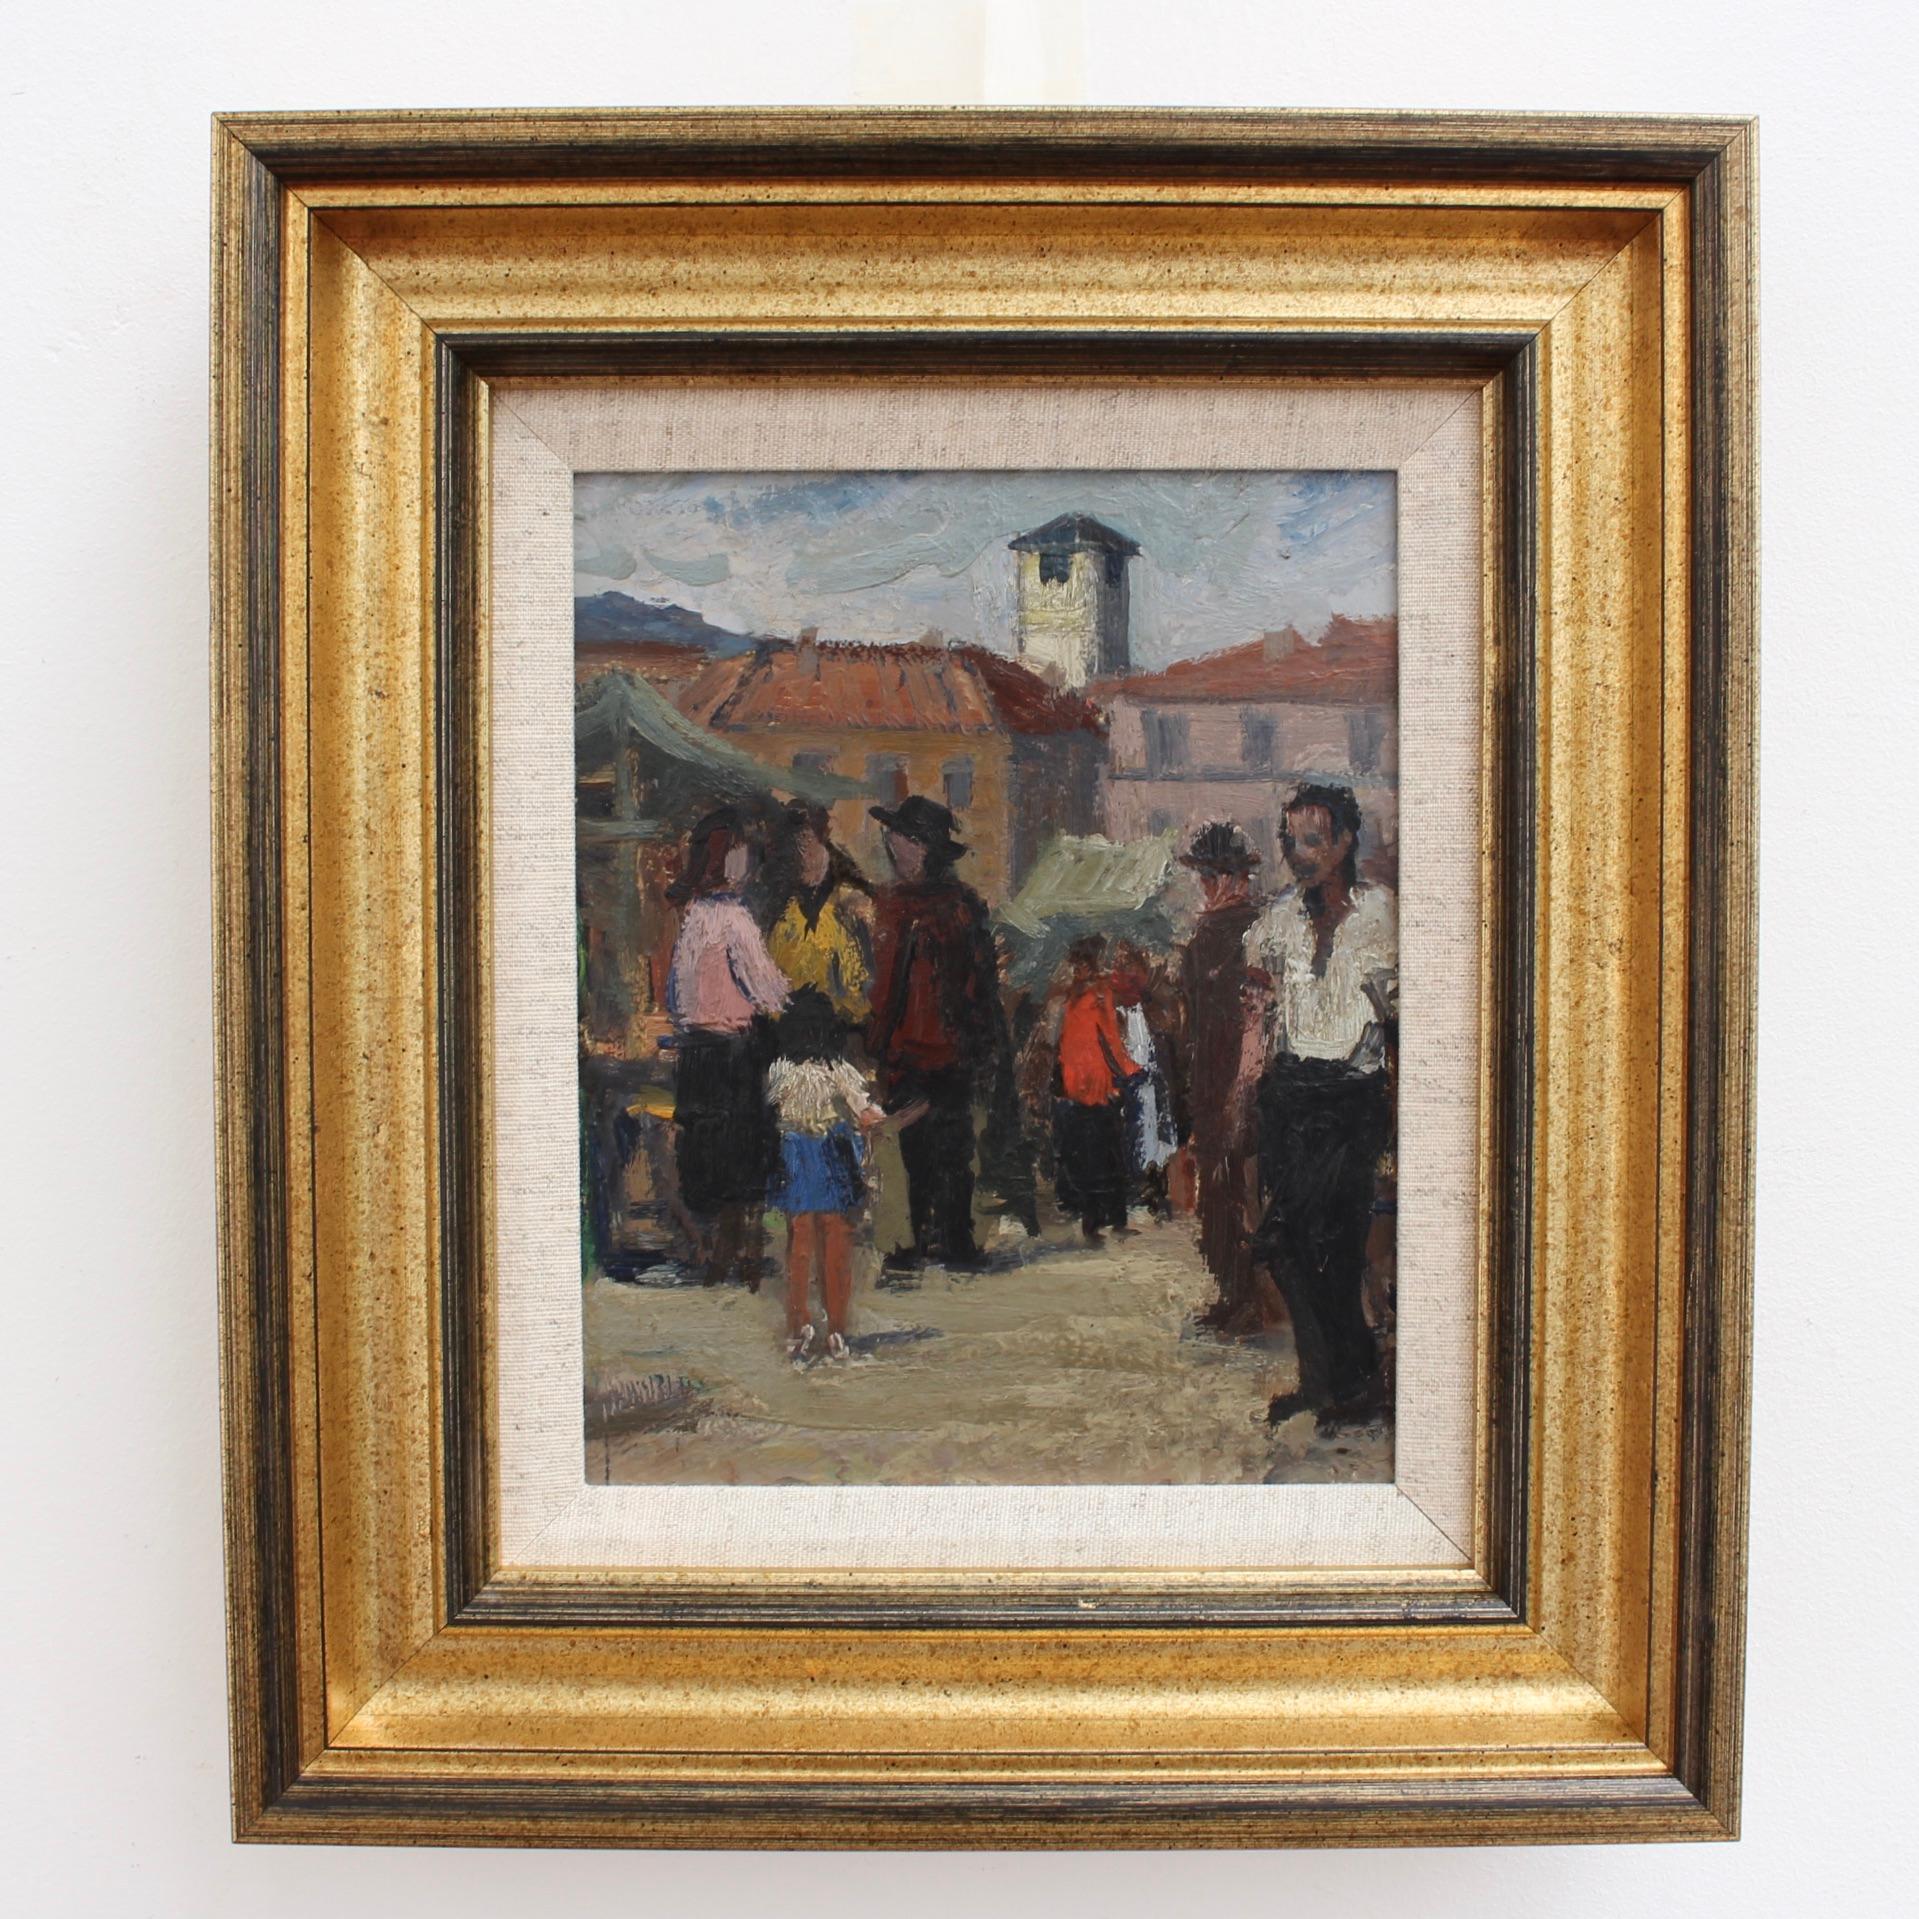 Market Day in Piazza Grande Locarno Switzerland - Painting by Unknown